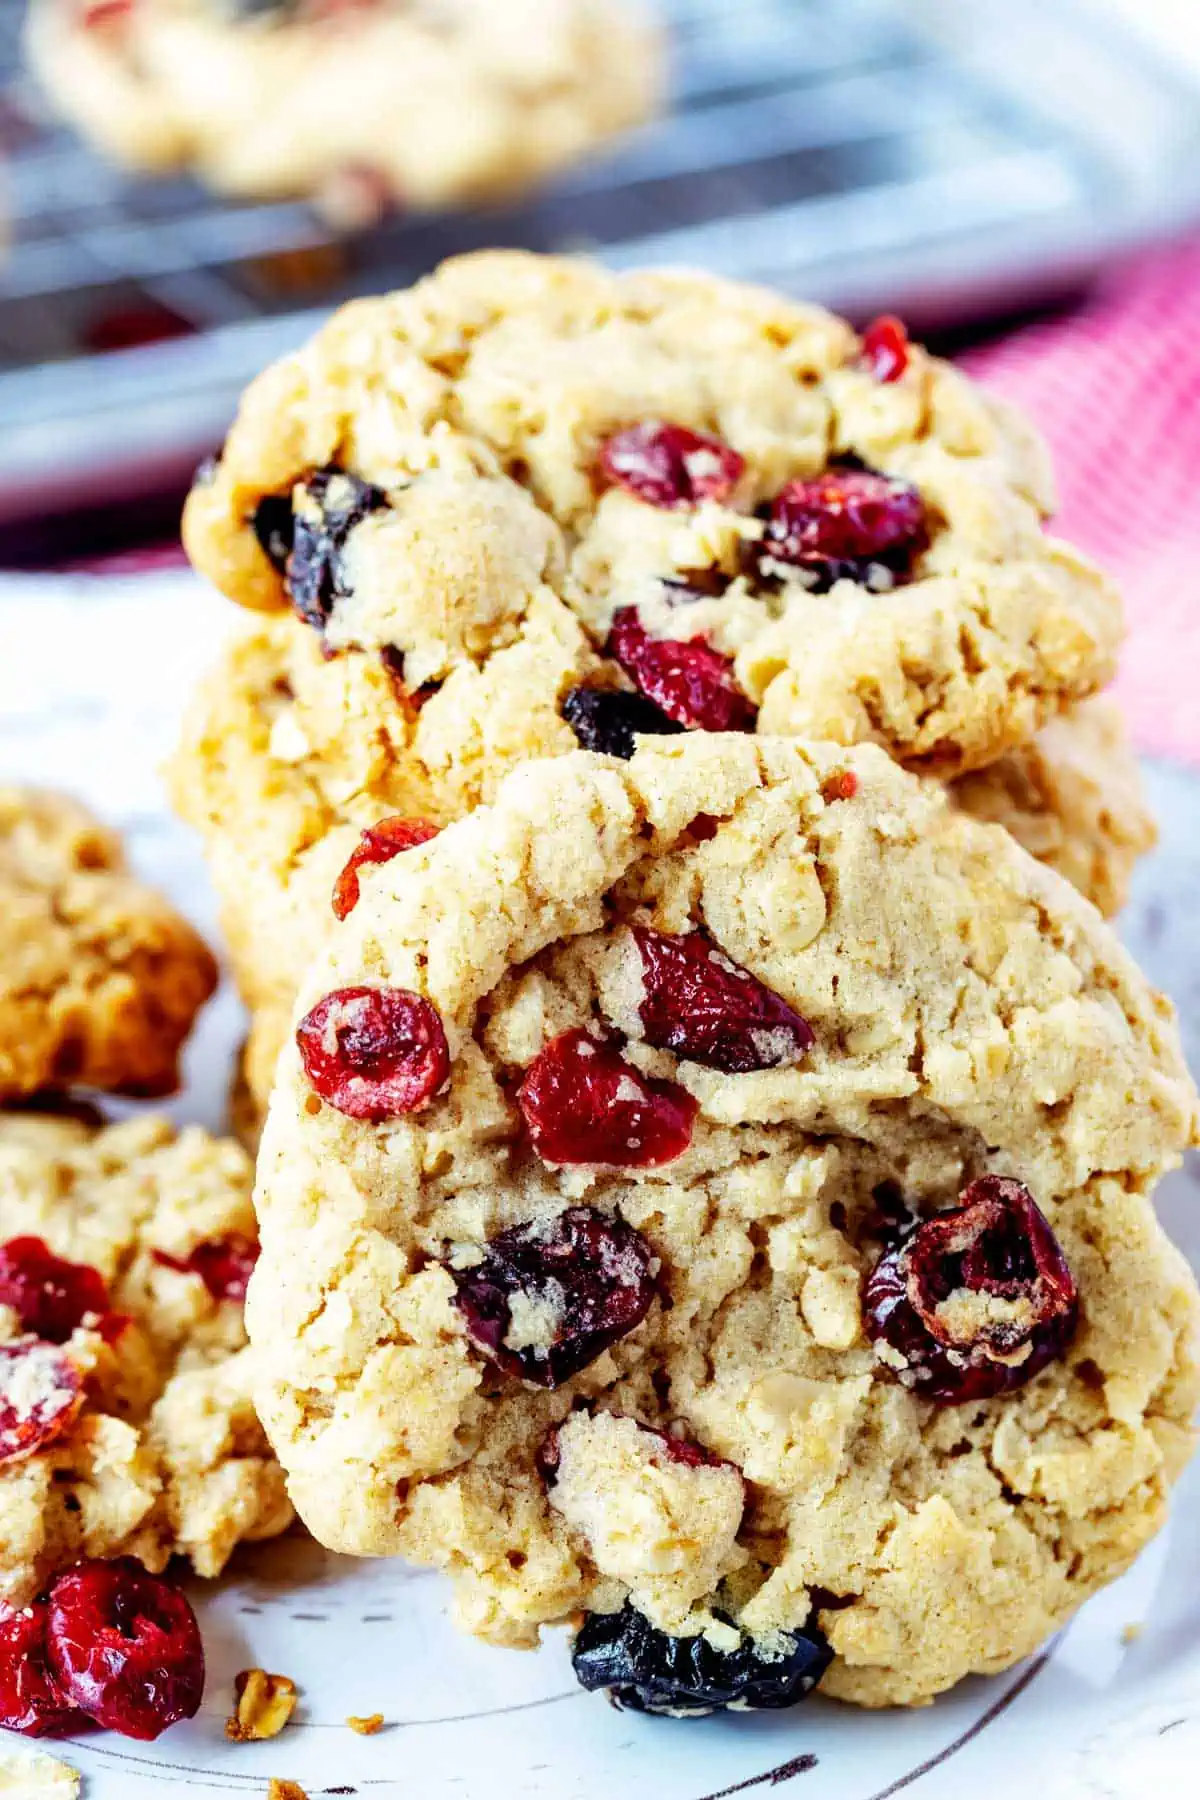 Close up photo of an oatmeal cranberry cookie resting on its side against a stack of cookies.